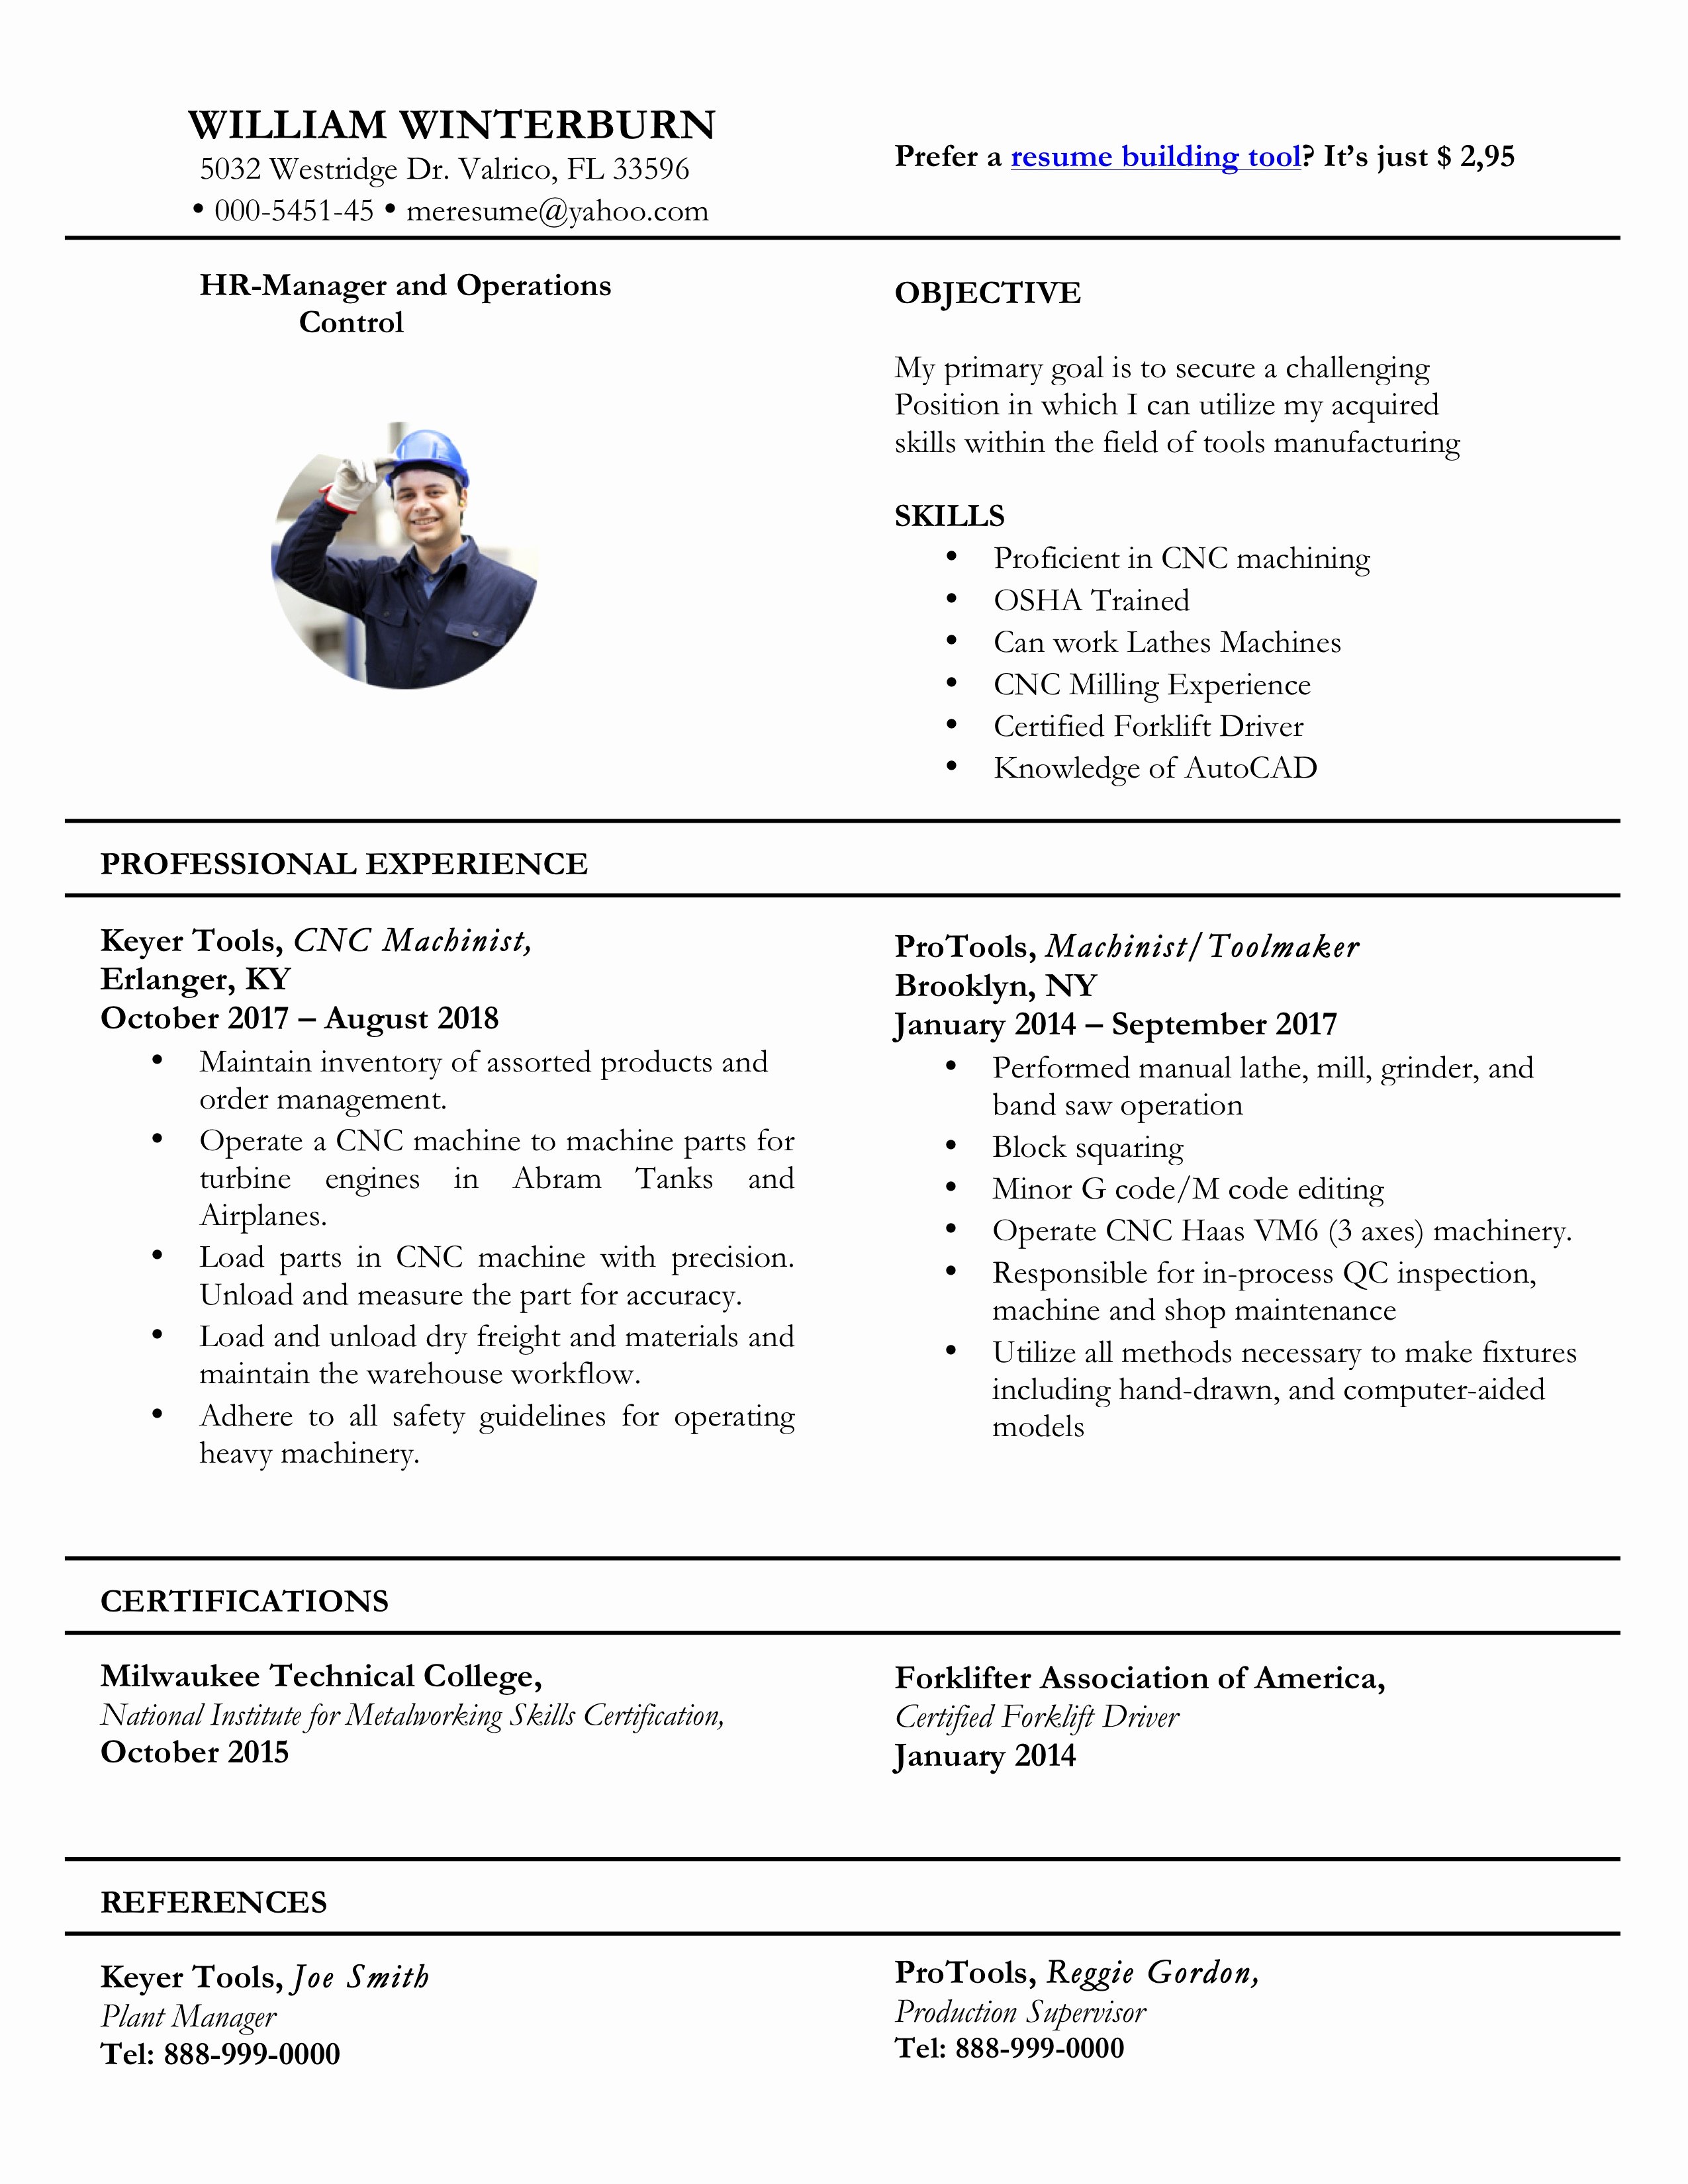 Resume Templates Free Word Lovely Resume Templates [2019] Pdf and Word